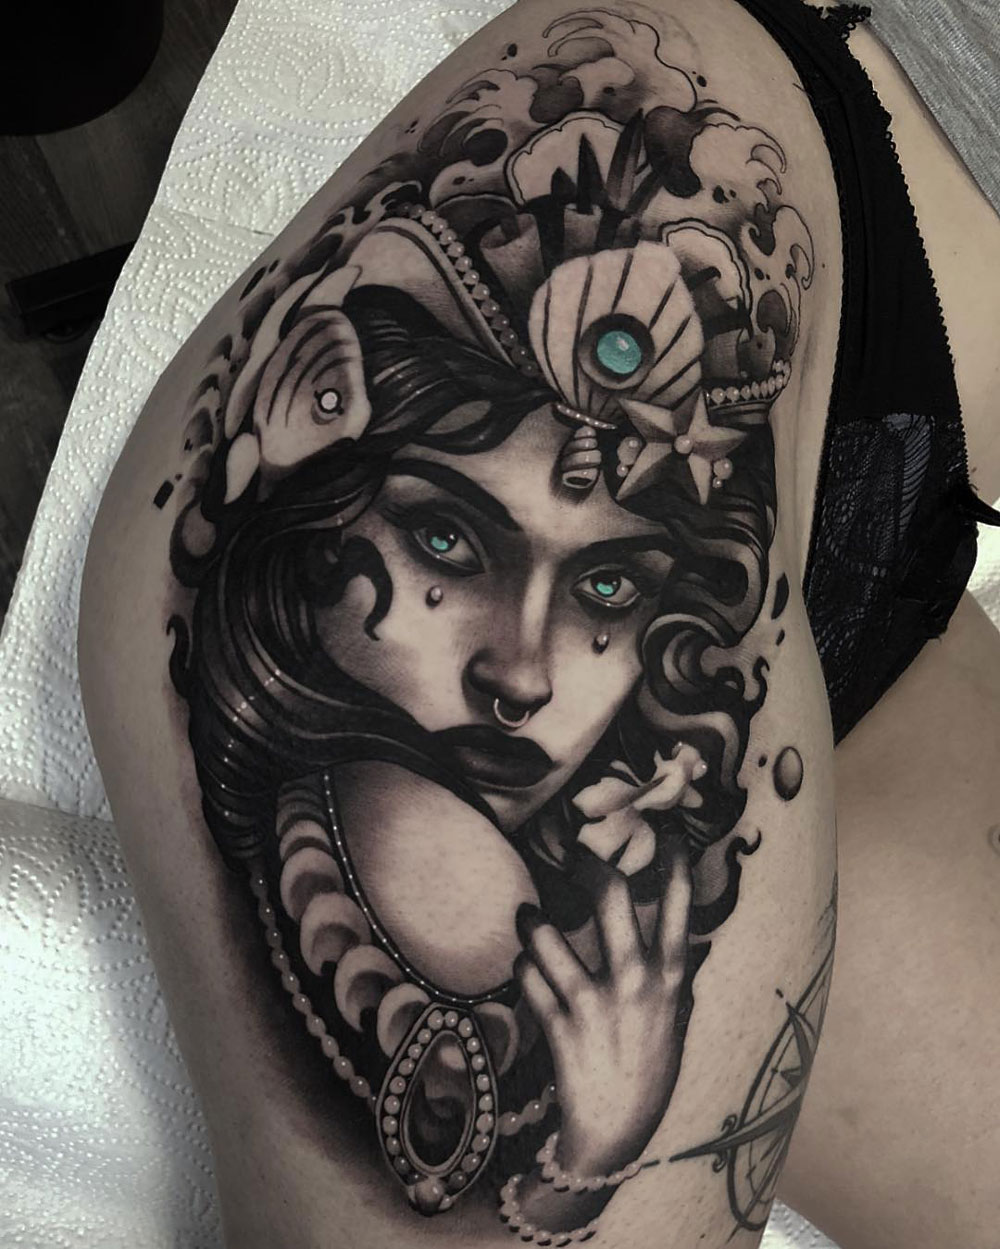 Lady's portrait done on girl's hip